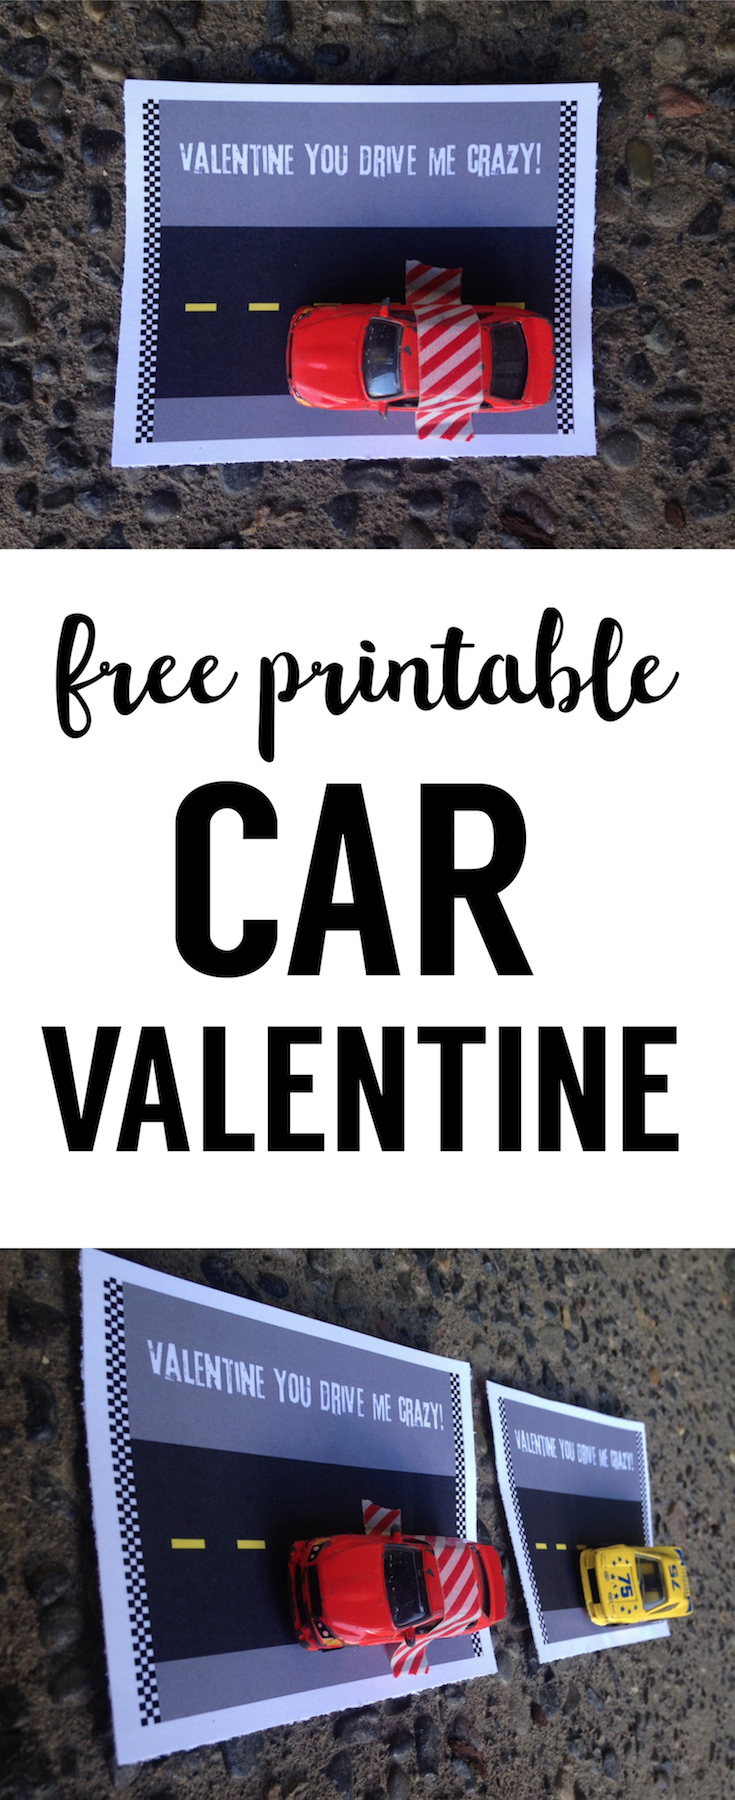 Free Printable Car Valentine Card. DIY no candy valentine is great for kids valentines at school valentine's day parties. 